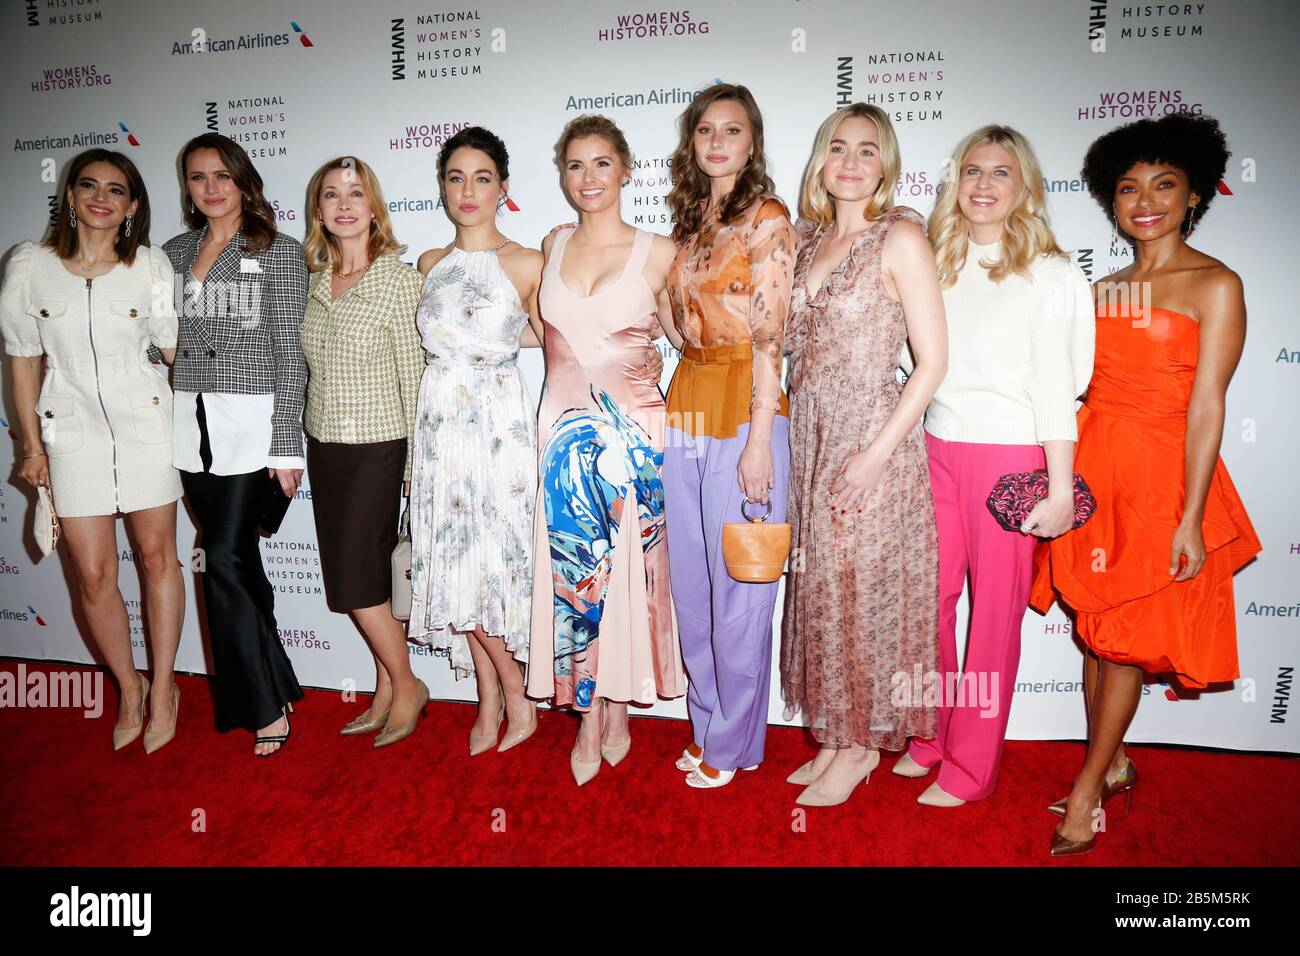 Los Angeles, USA. 08th Mar, 2020. (L-R) Edy Ganem, Shantel VanSanten, Sharon Lawrence, Jade Tailor, Brianna Brown, Aly Michalka, AJ Michalka, Guest, Logan Browning walking the red carpet at The National Women's History Museum's 8th Annual Women Making History Awards held at Skirball Cultural Center on March 8, 2020 in Hollywood, California USA (Photo by Parisa Afsahi/Sipa USA) Credit: Sipa USA/Alamy Live News Stock Photo